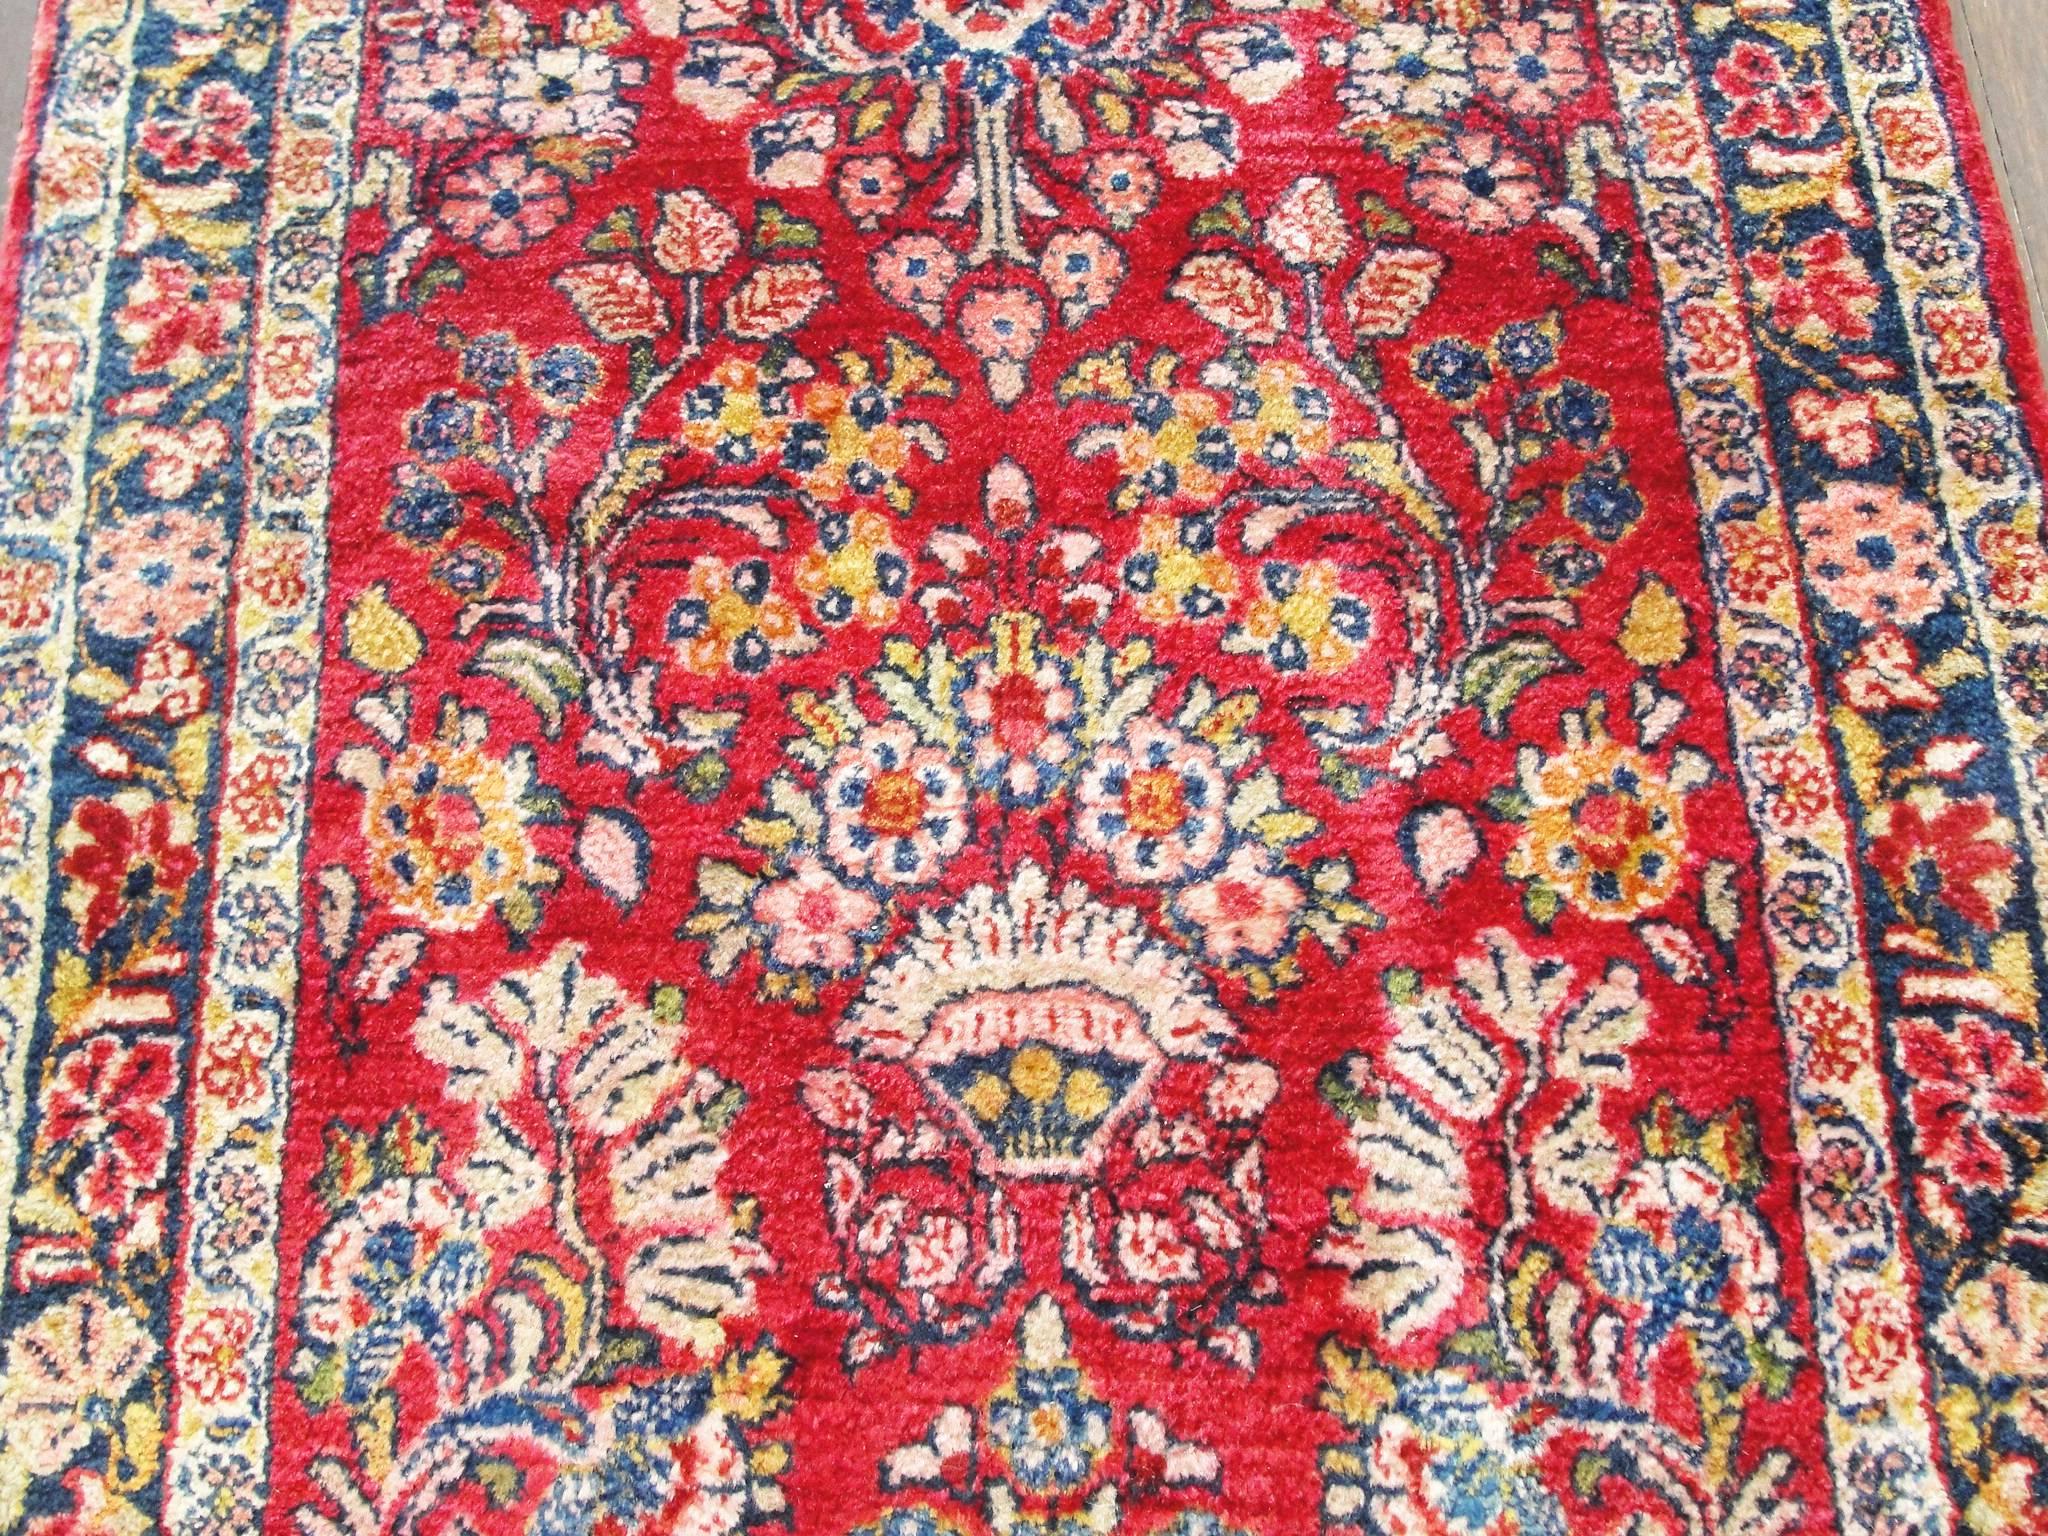 Antique Persian Sarouk Runner In Excellent Condition For Sale In Evanston, IL